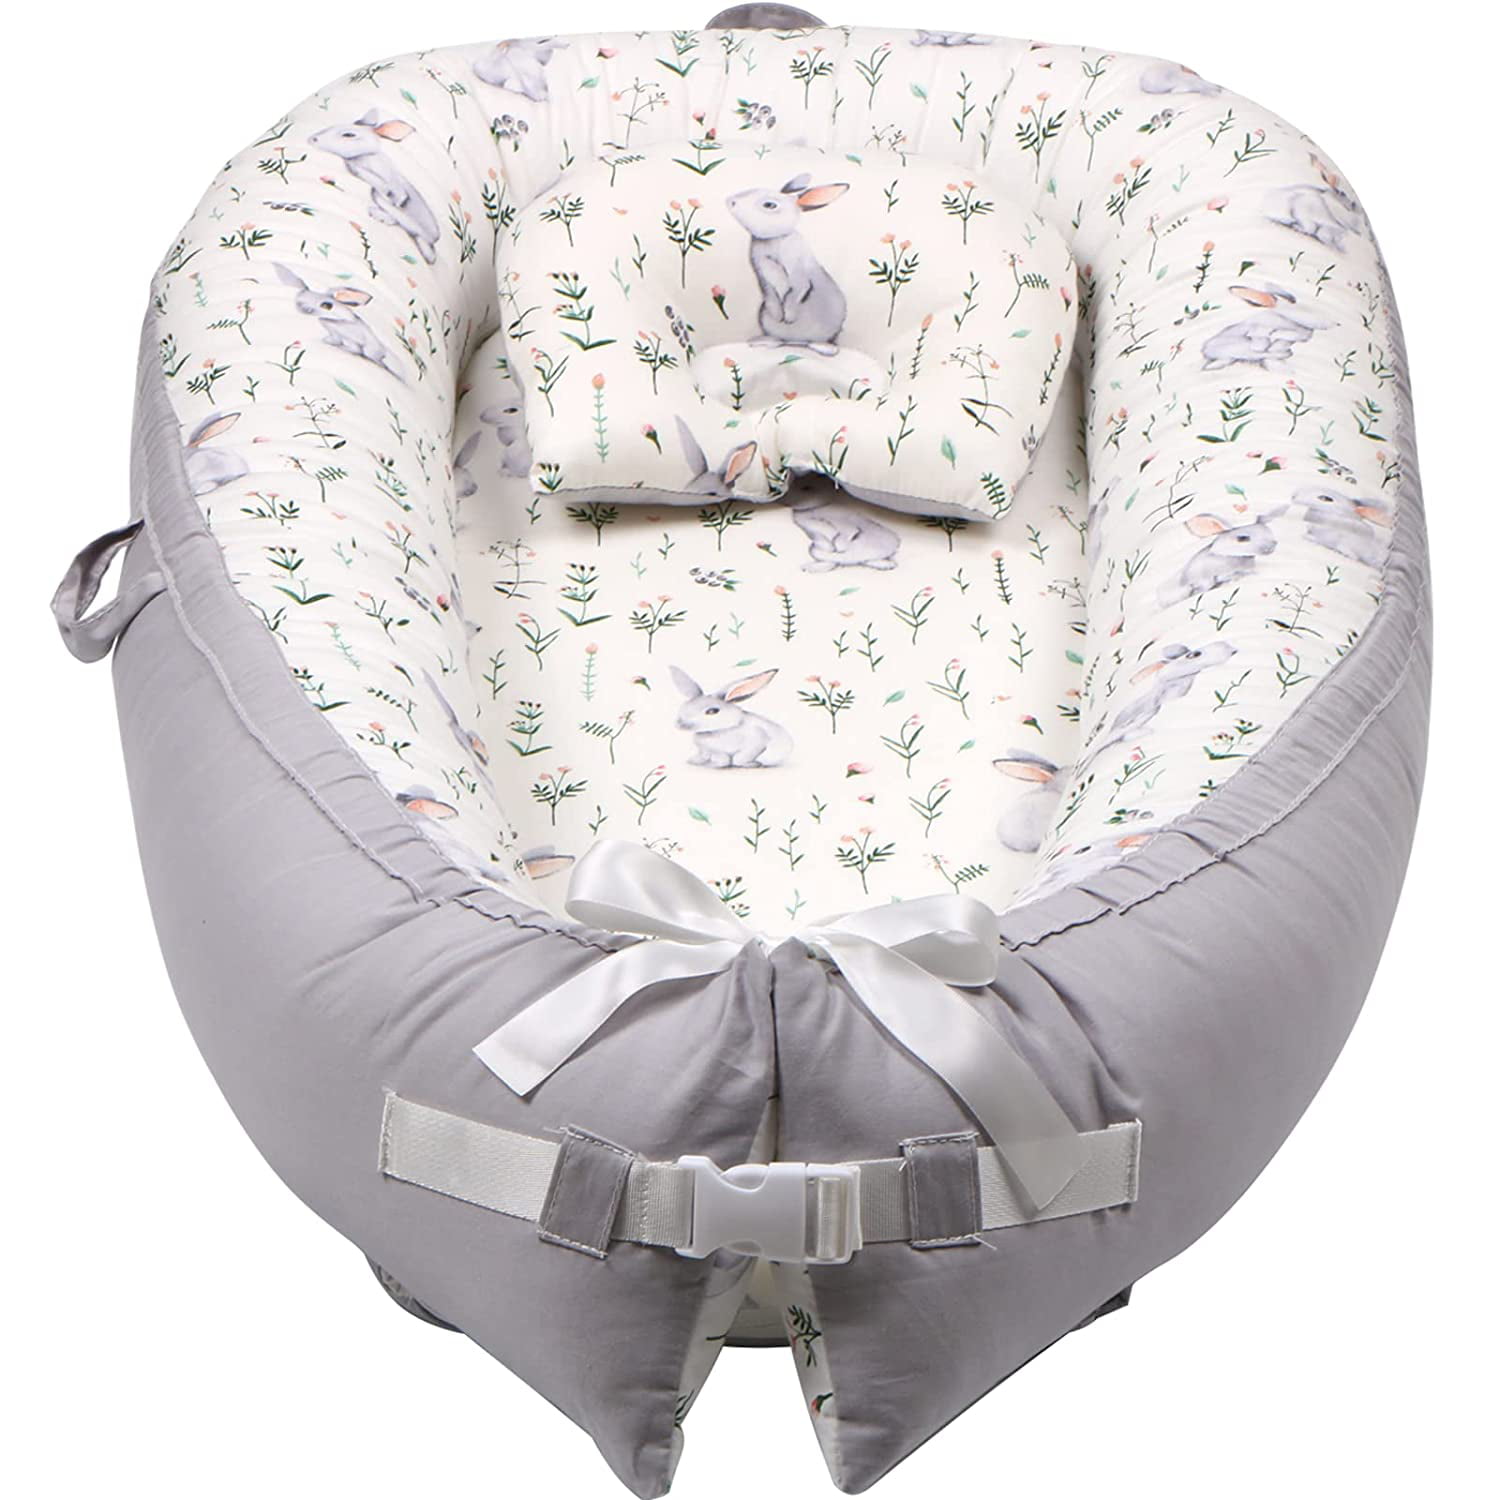 Newborn Lounger 100% Cotton Portable Crib for Bassinet in Bed Grey Baby Lounger Baby Nest Co-Sleeping for Baby with Safety Belt 